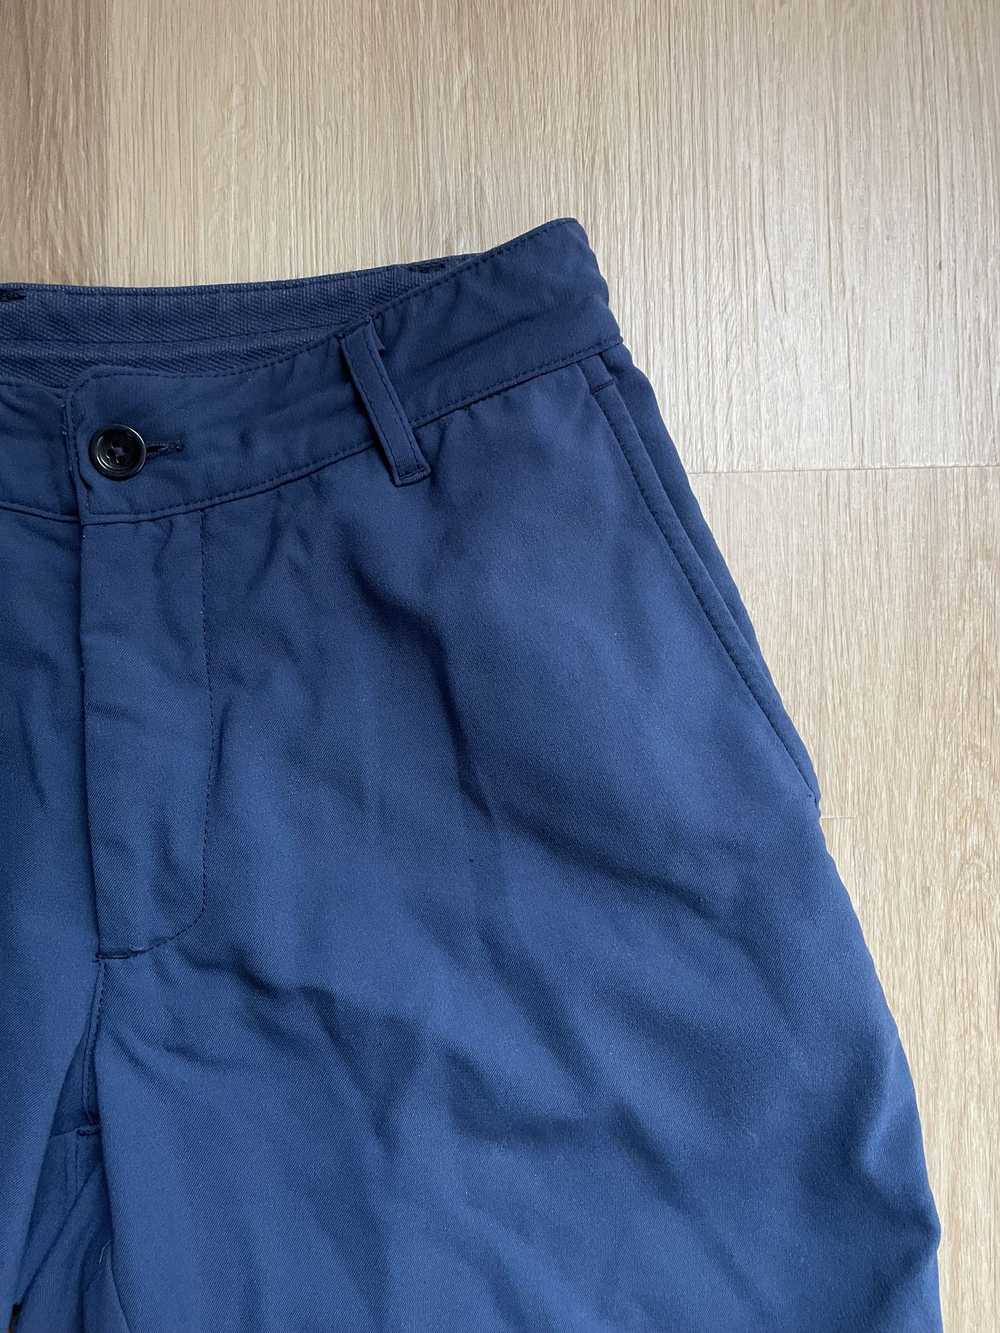 Outlier Outlier Three Way Shorts Navy Blue Men's … - image 3